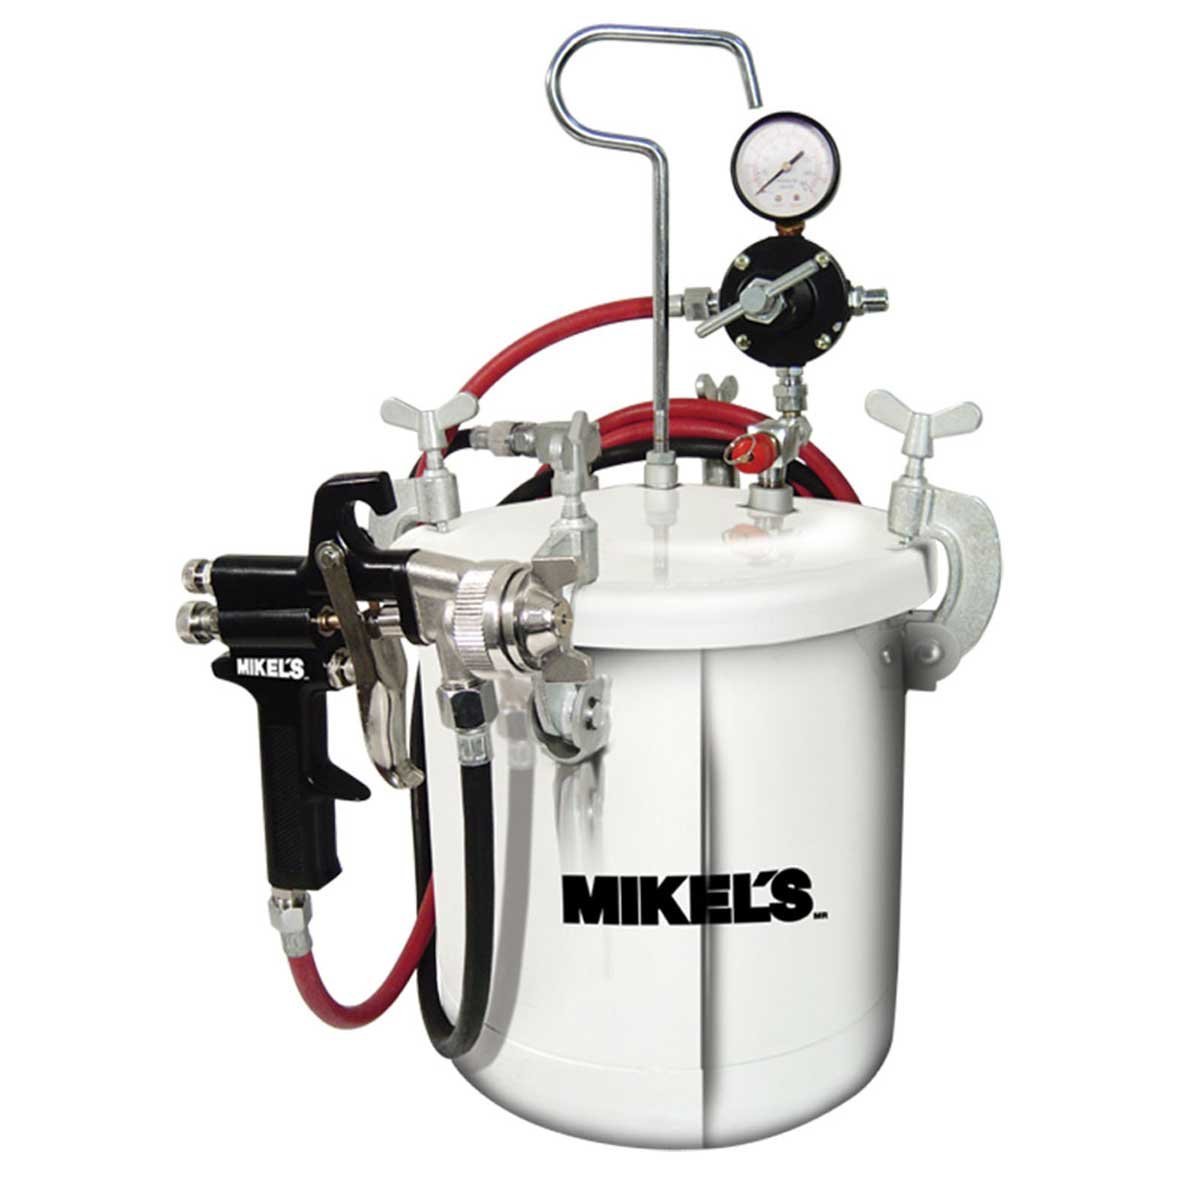 Tanque Industrial para Pintor 10Lts Mikels